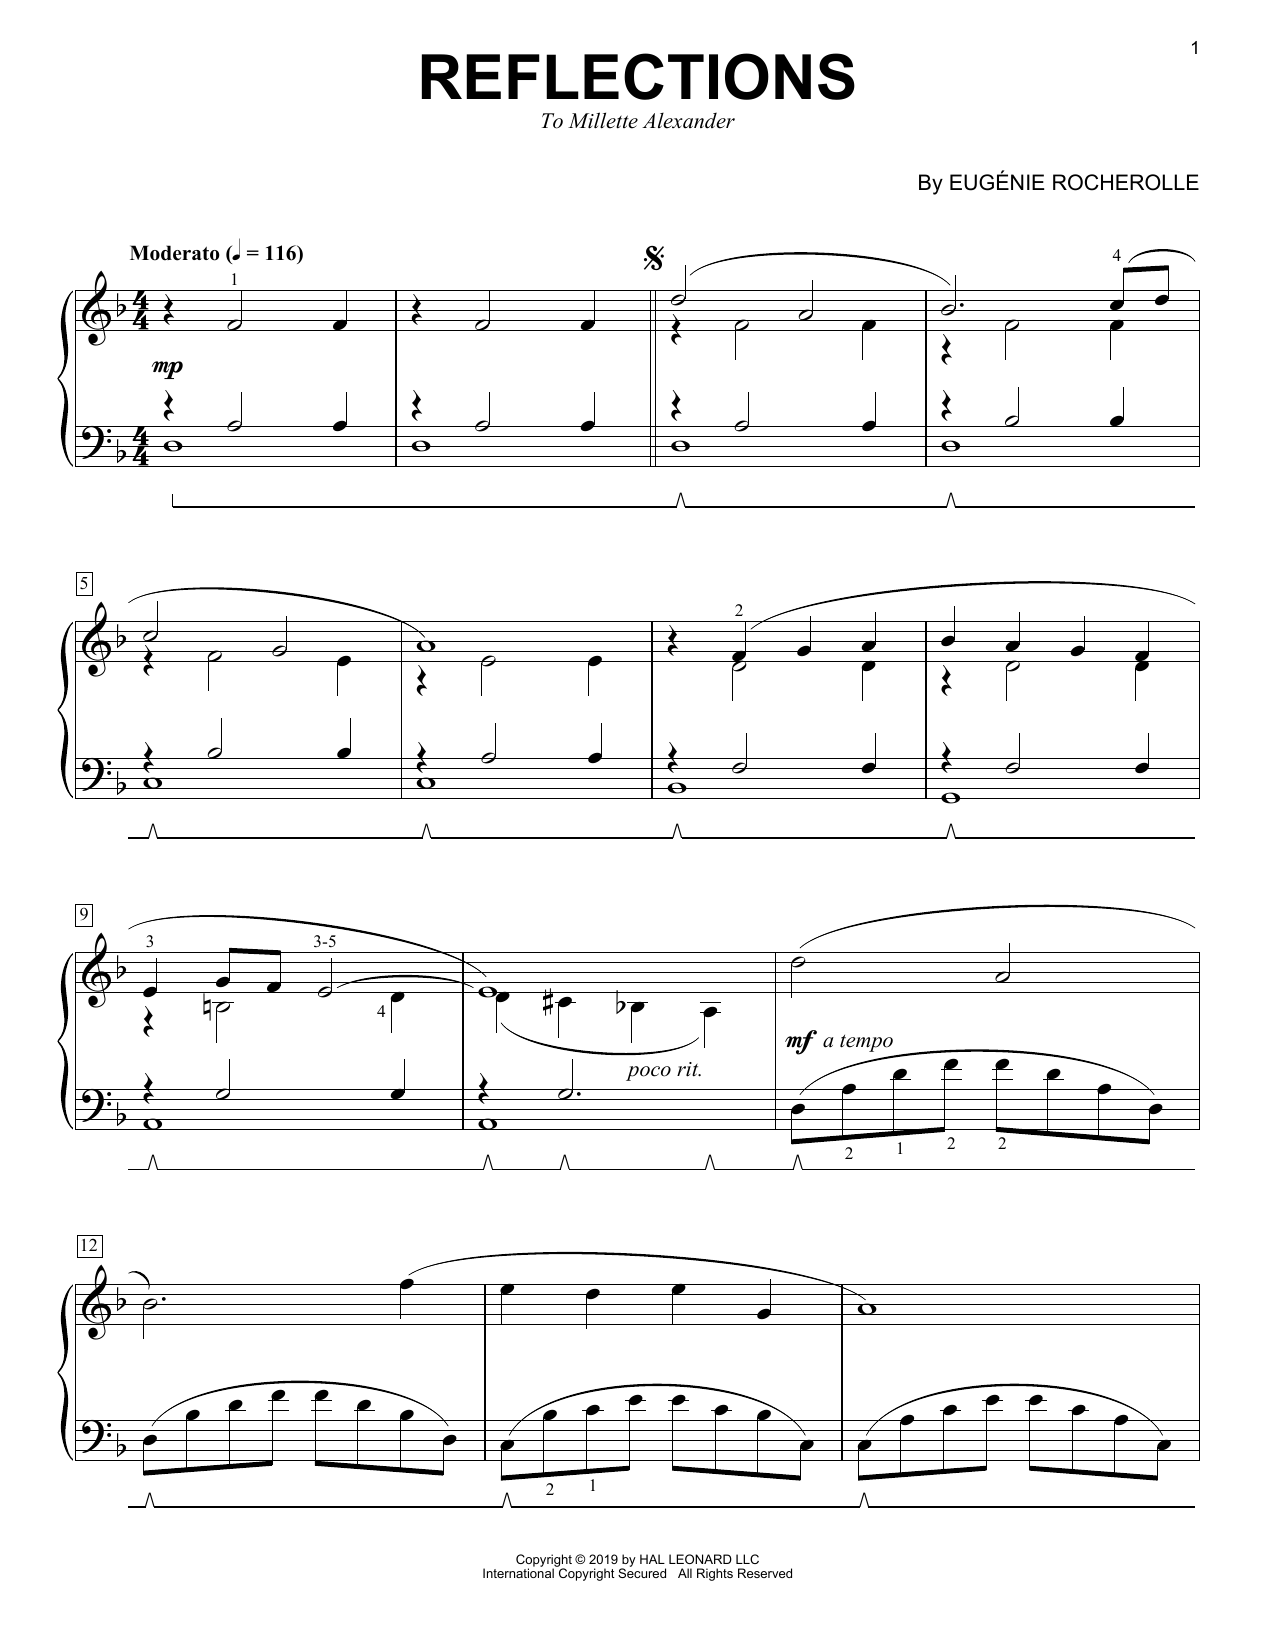 Download Eugenie Rocherolle Reflections Sheet Music